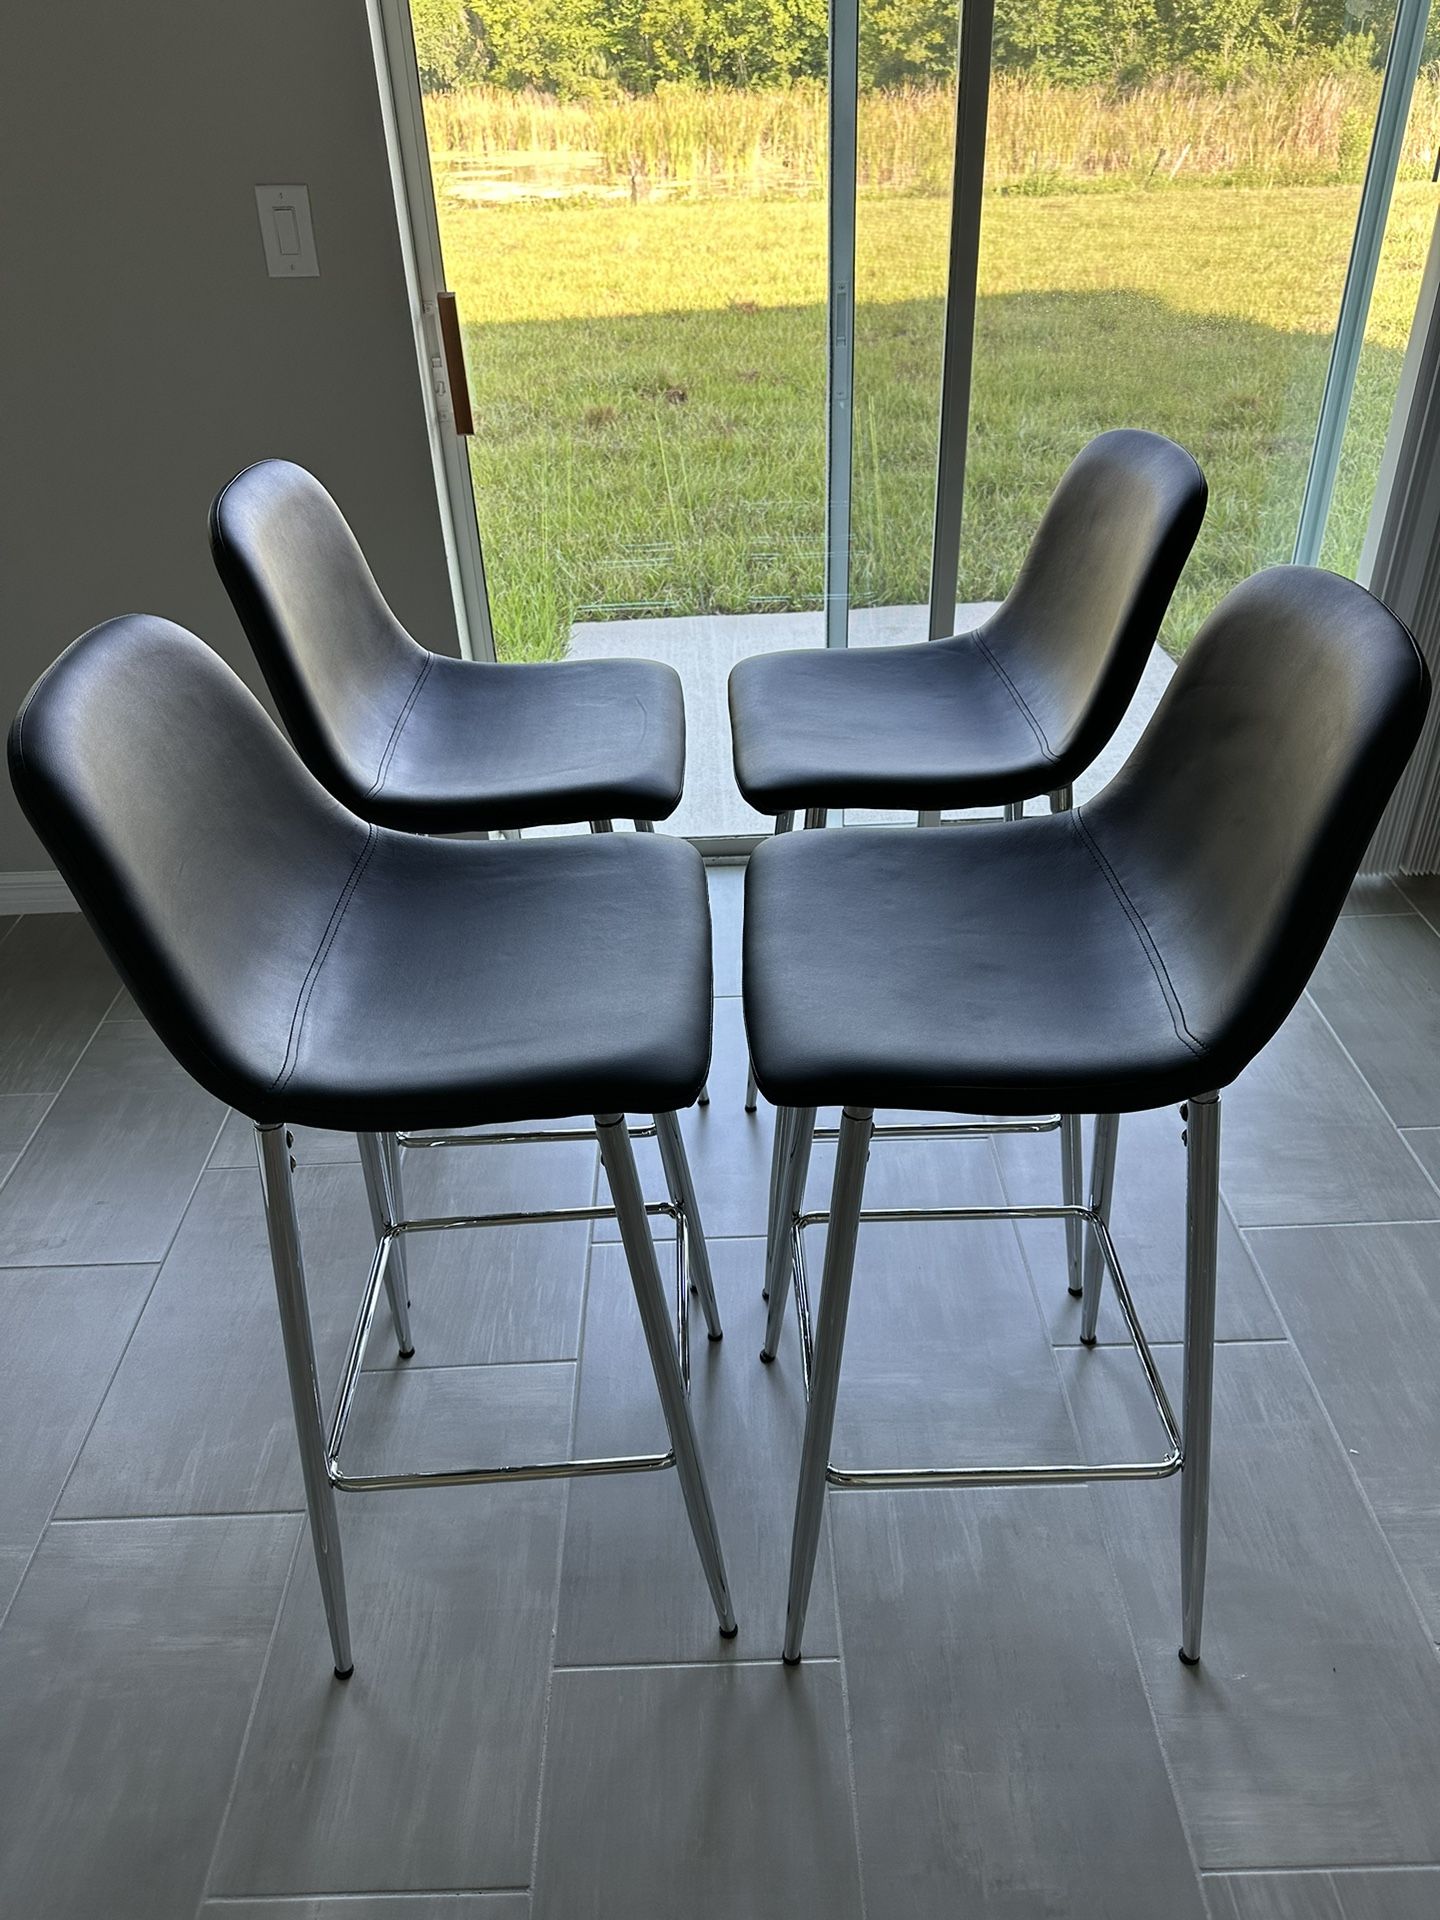 NEW - Set of 4 Counter Height Chairs